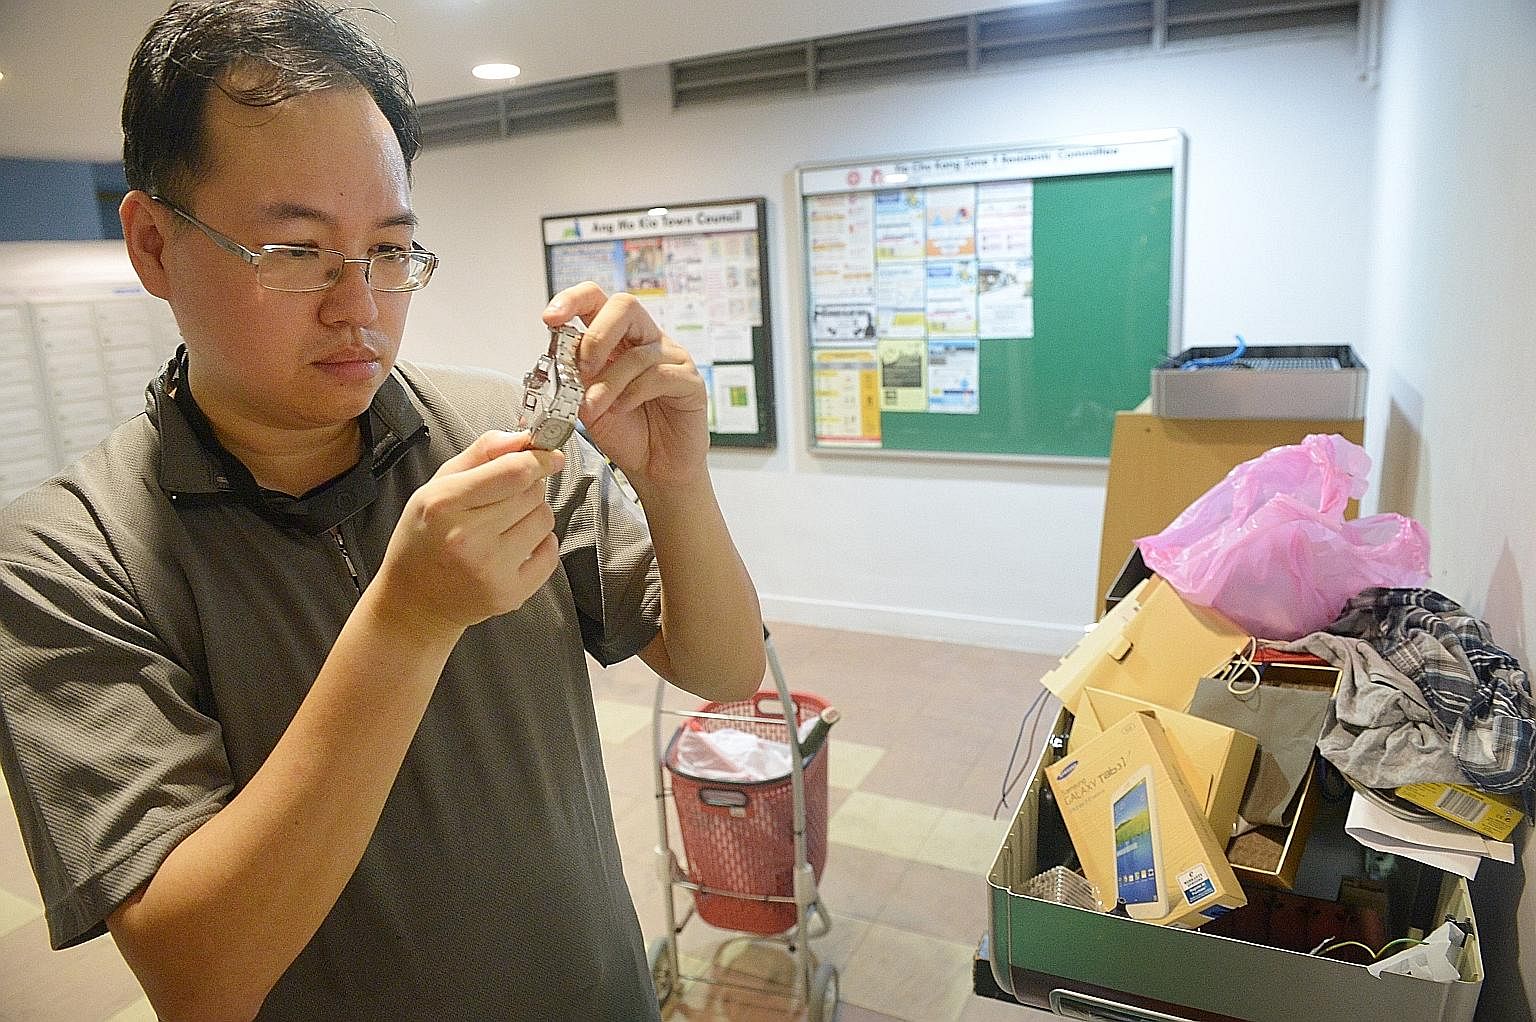 Mr Daniel Tay examining a watch that he found discarded at the void deck of a Housing Board block near his flat in Ang Mo Kio. He says it does not make any sense that people here waste tonnes of food every year when there are others who do not have e